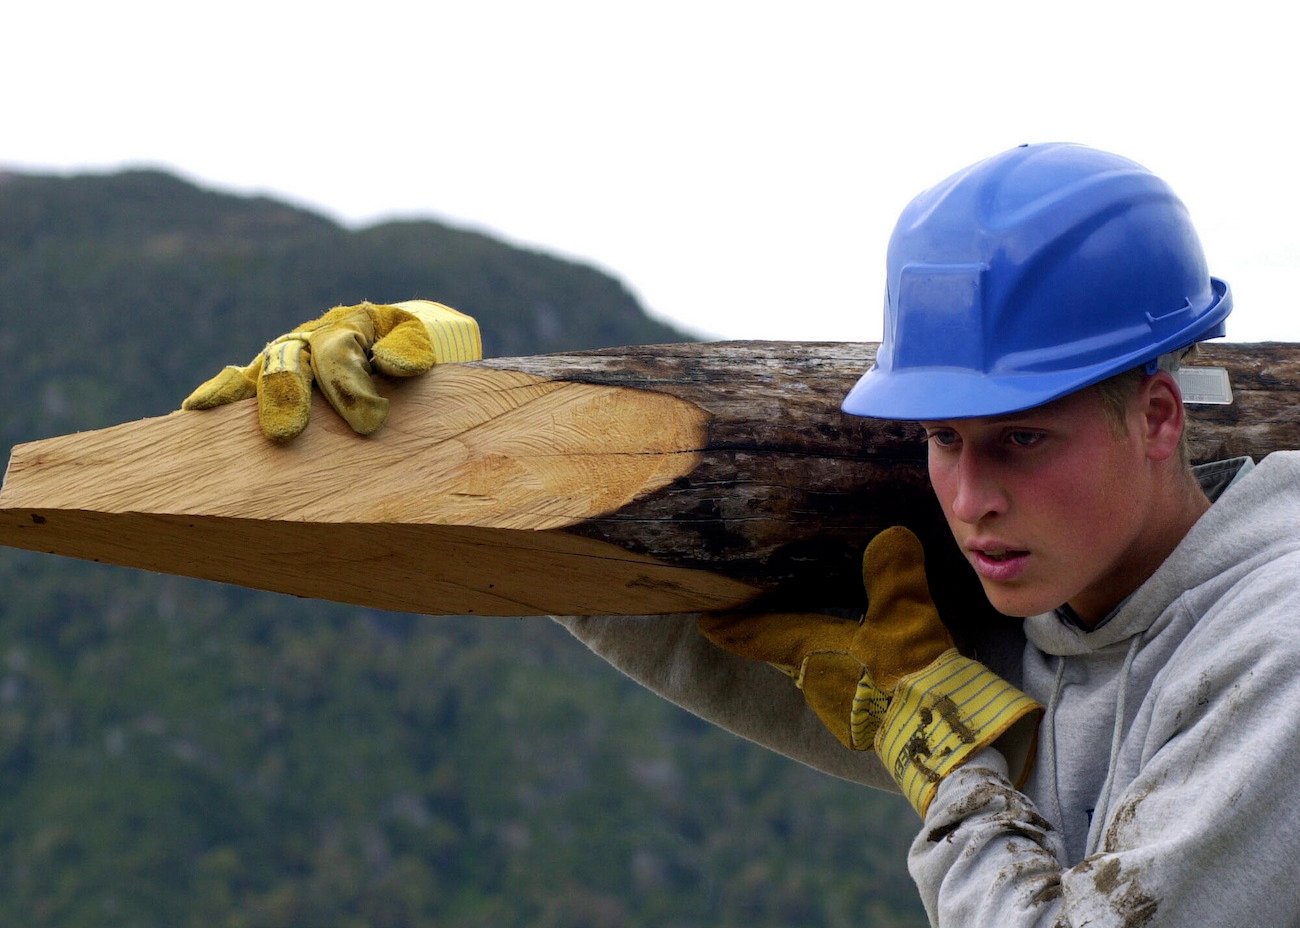 Prince William carrying a log and wearing a hard hat